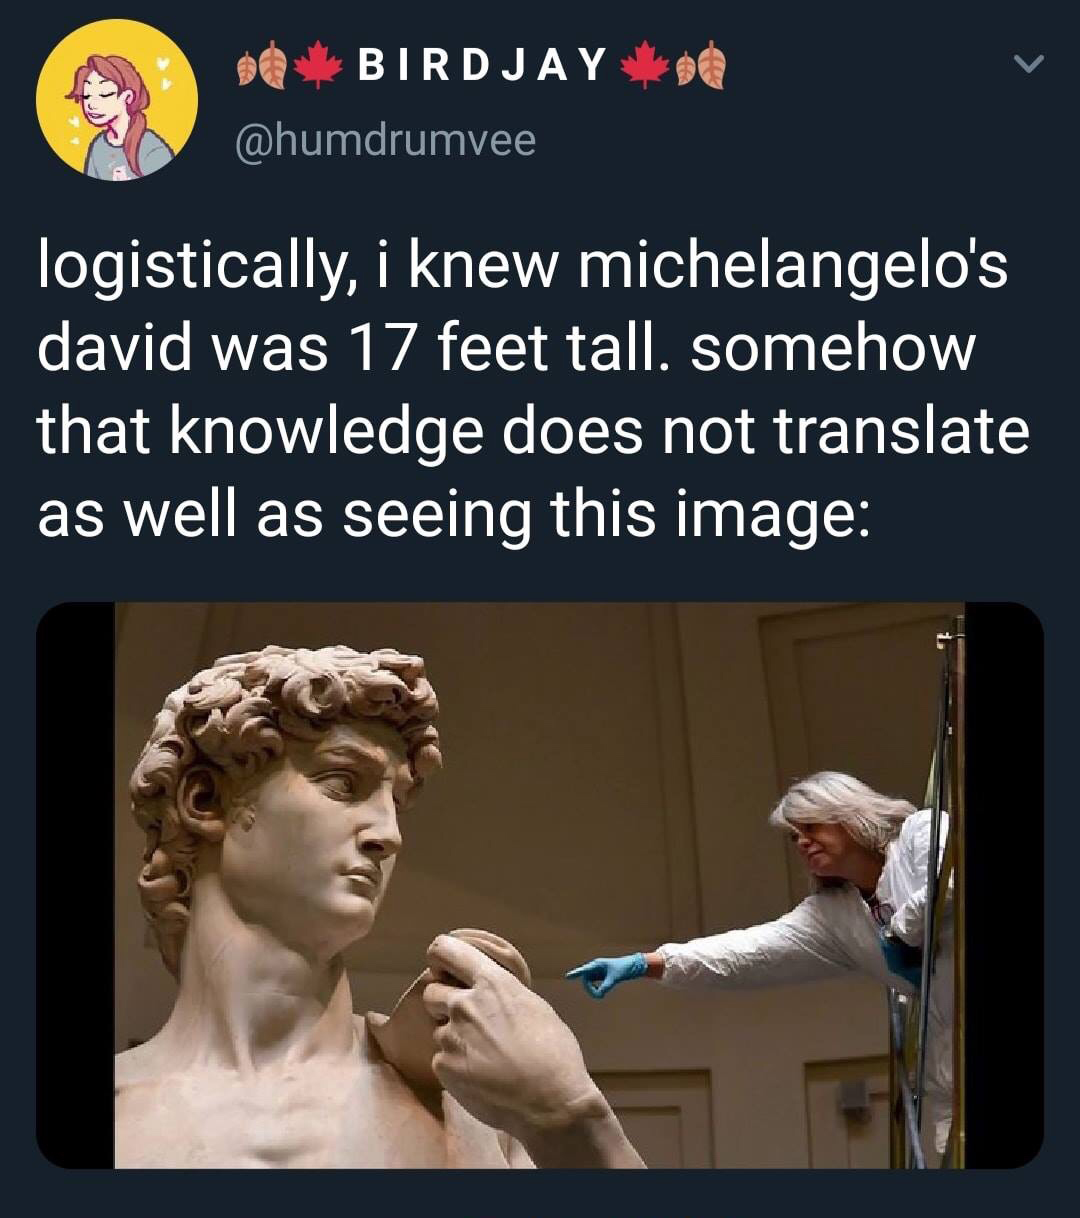 david - 0 Do Bird Jay logistically, i knew michelangelo's david was 17 feet tall. somehow that knowledge does not translate as well as seeing this image